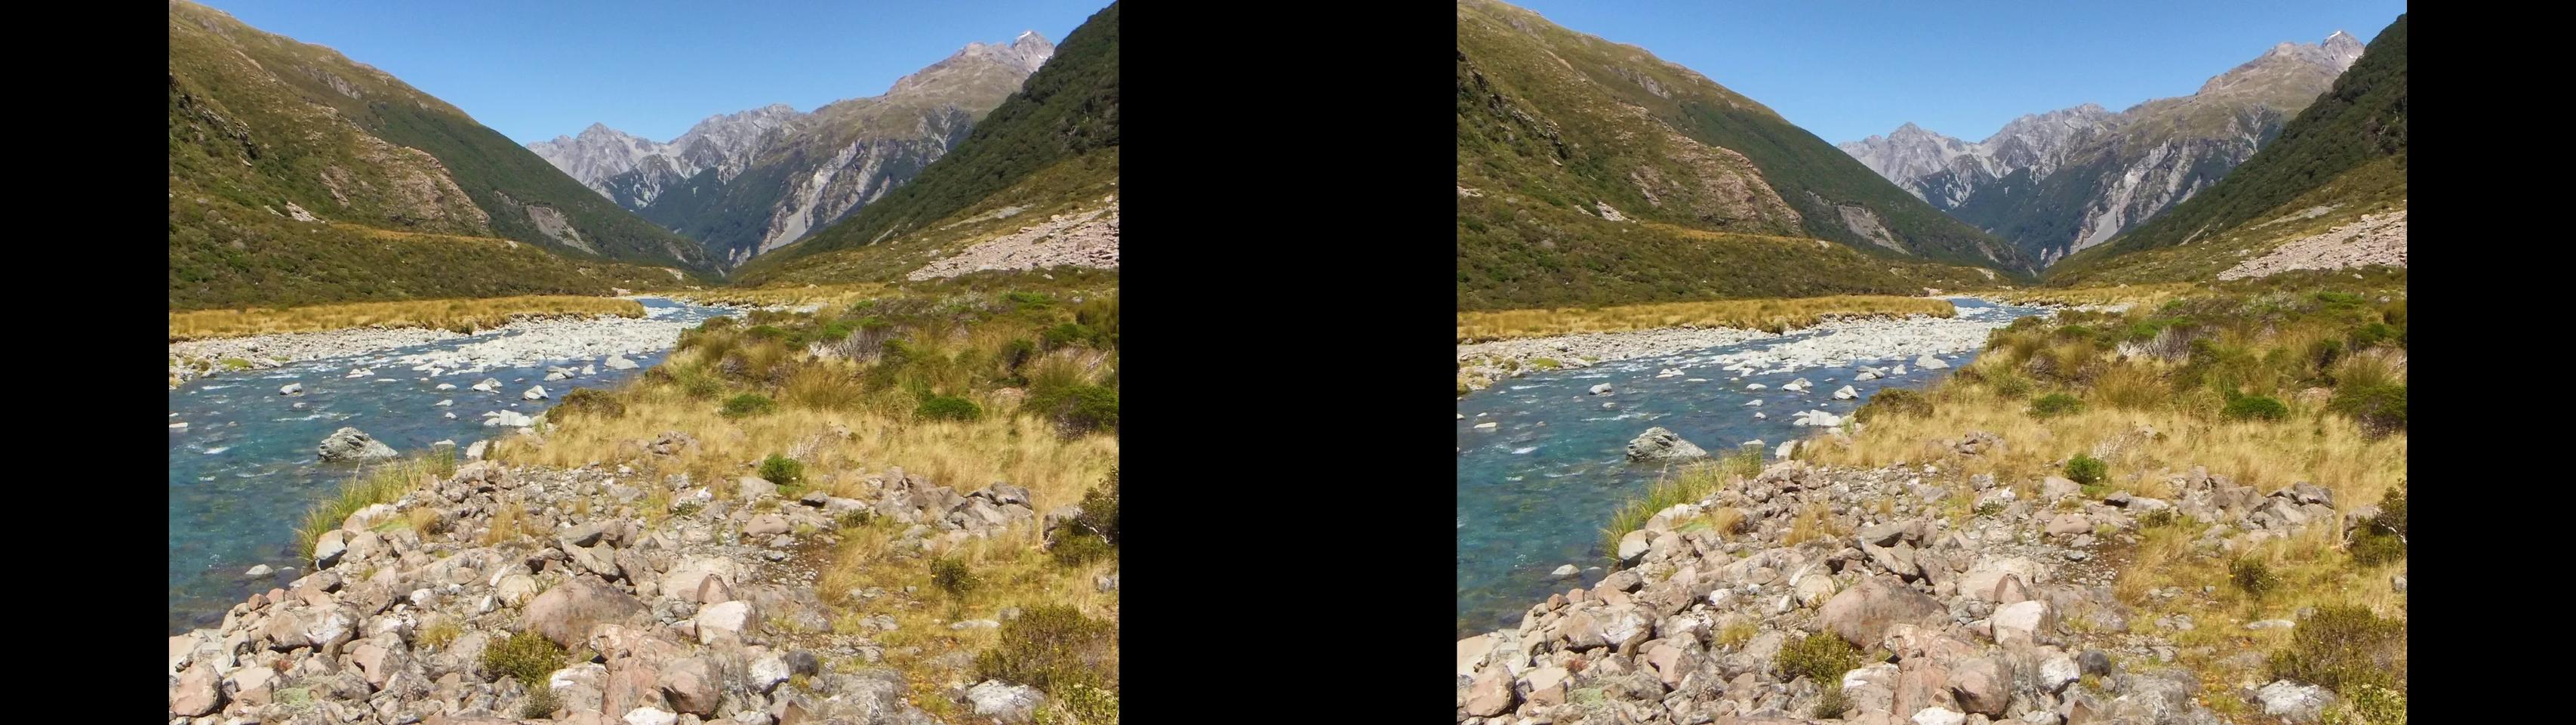 Hiking in the South Island of New Zealand